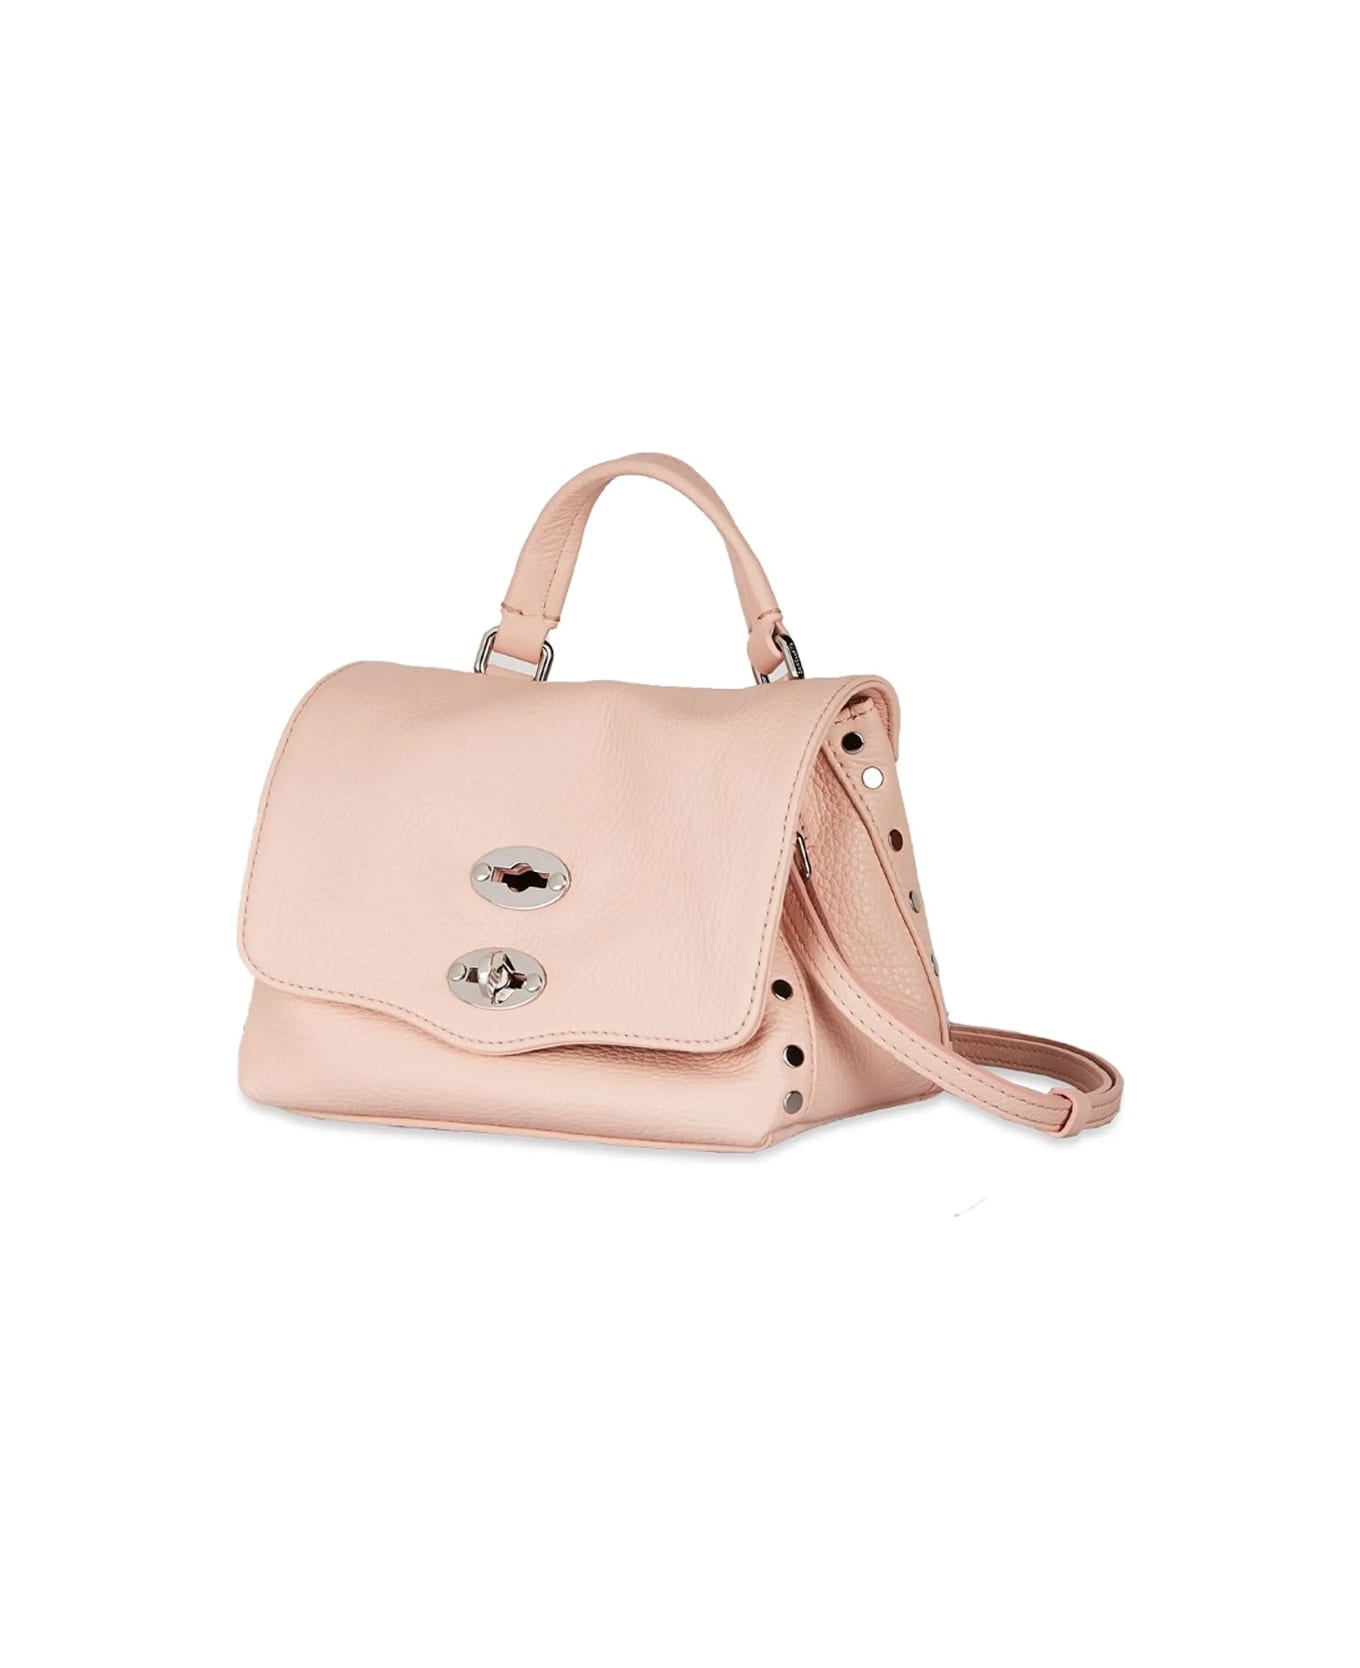 Zanellato Postina Daily Pink Leather Bag With Shoulder Strap - ROSA COCOON